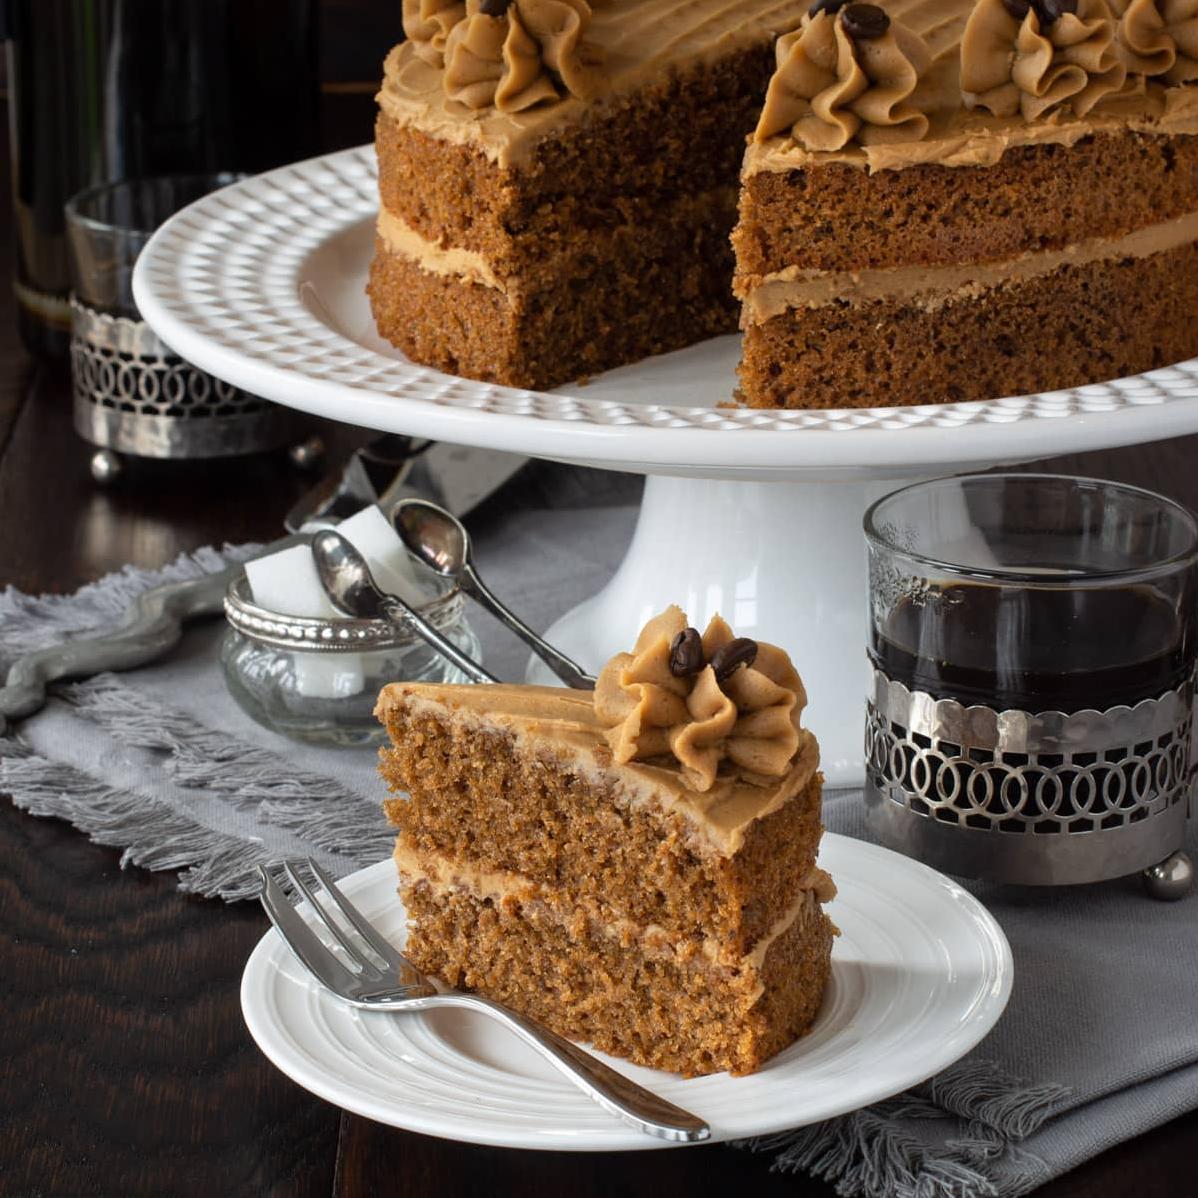  A classic coffee cake recipe that everyone is sure to love